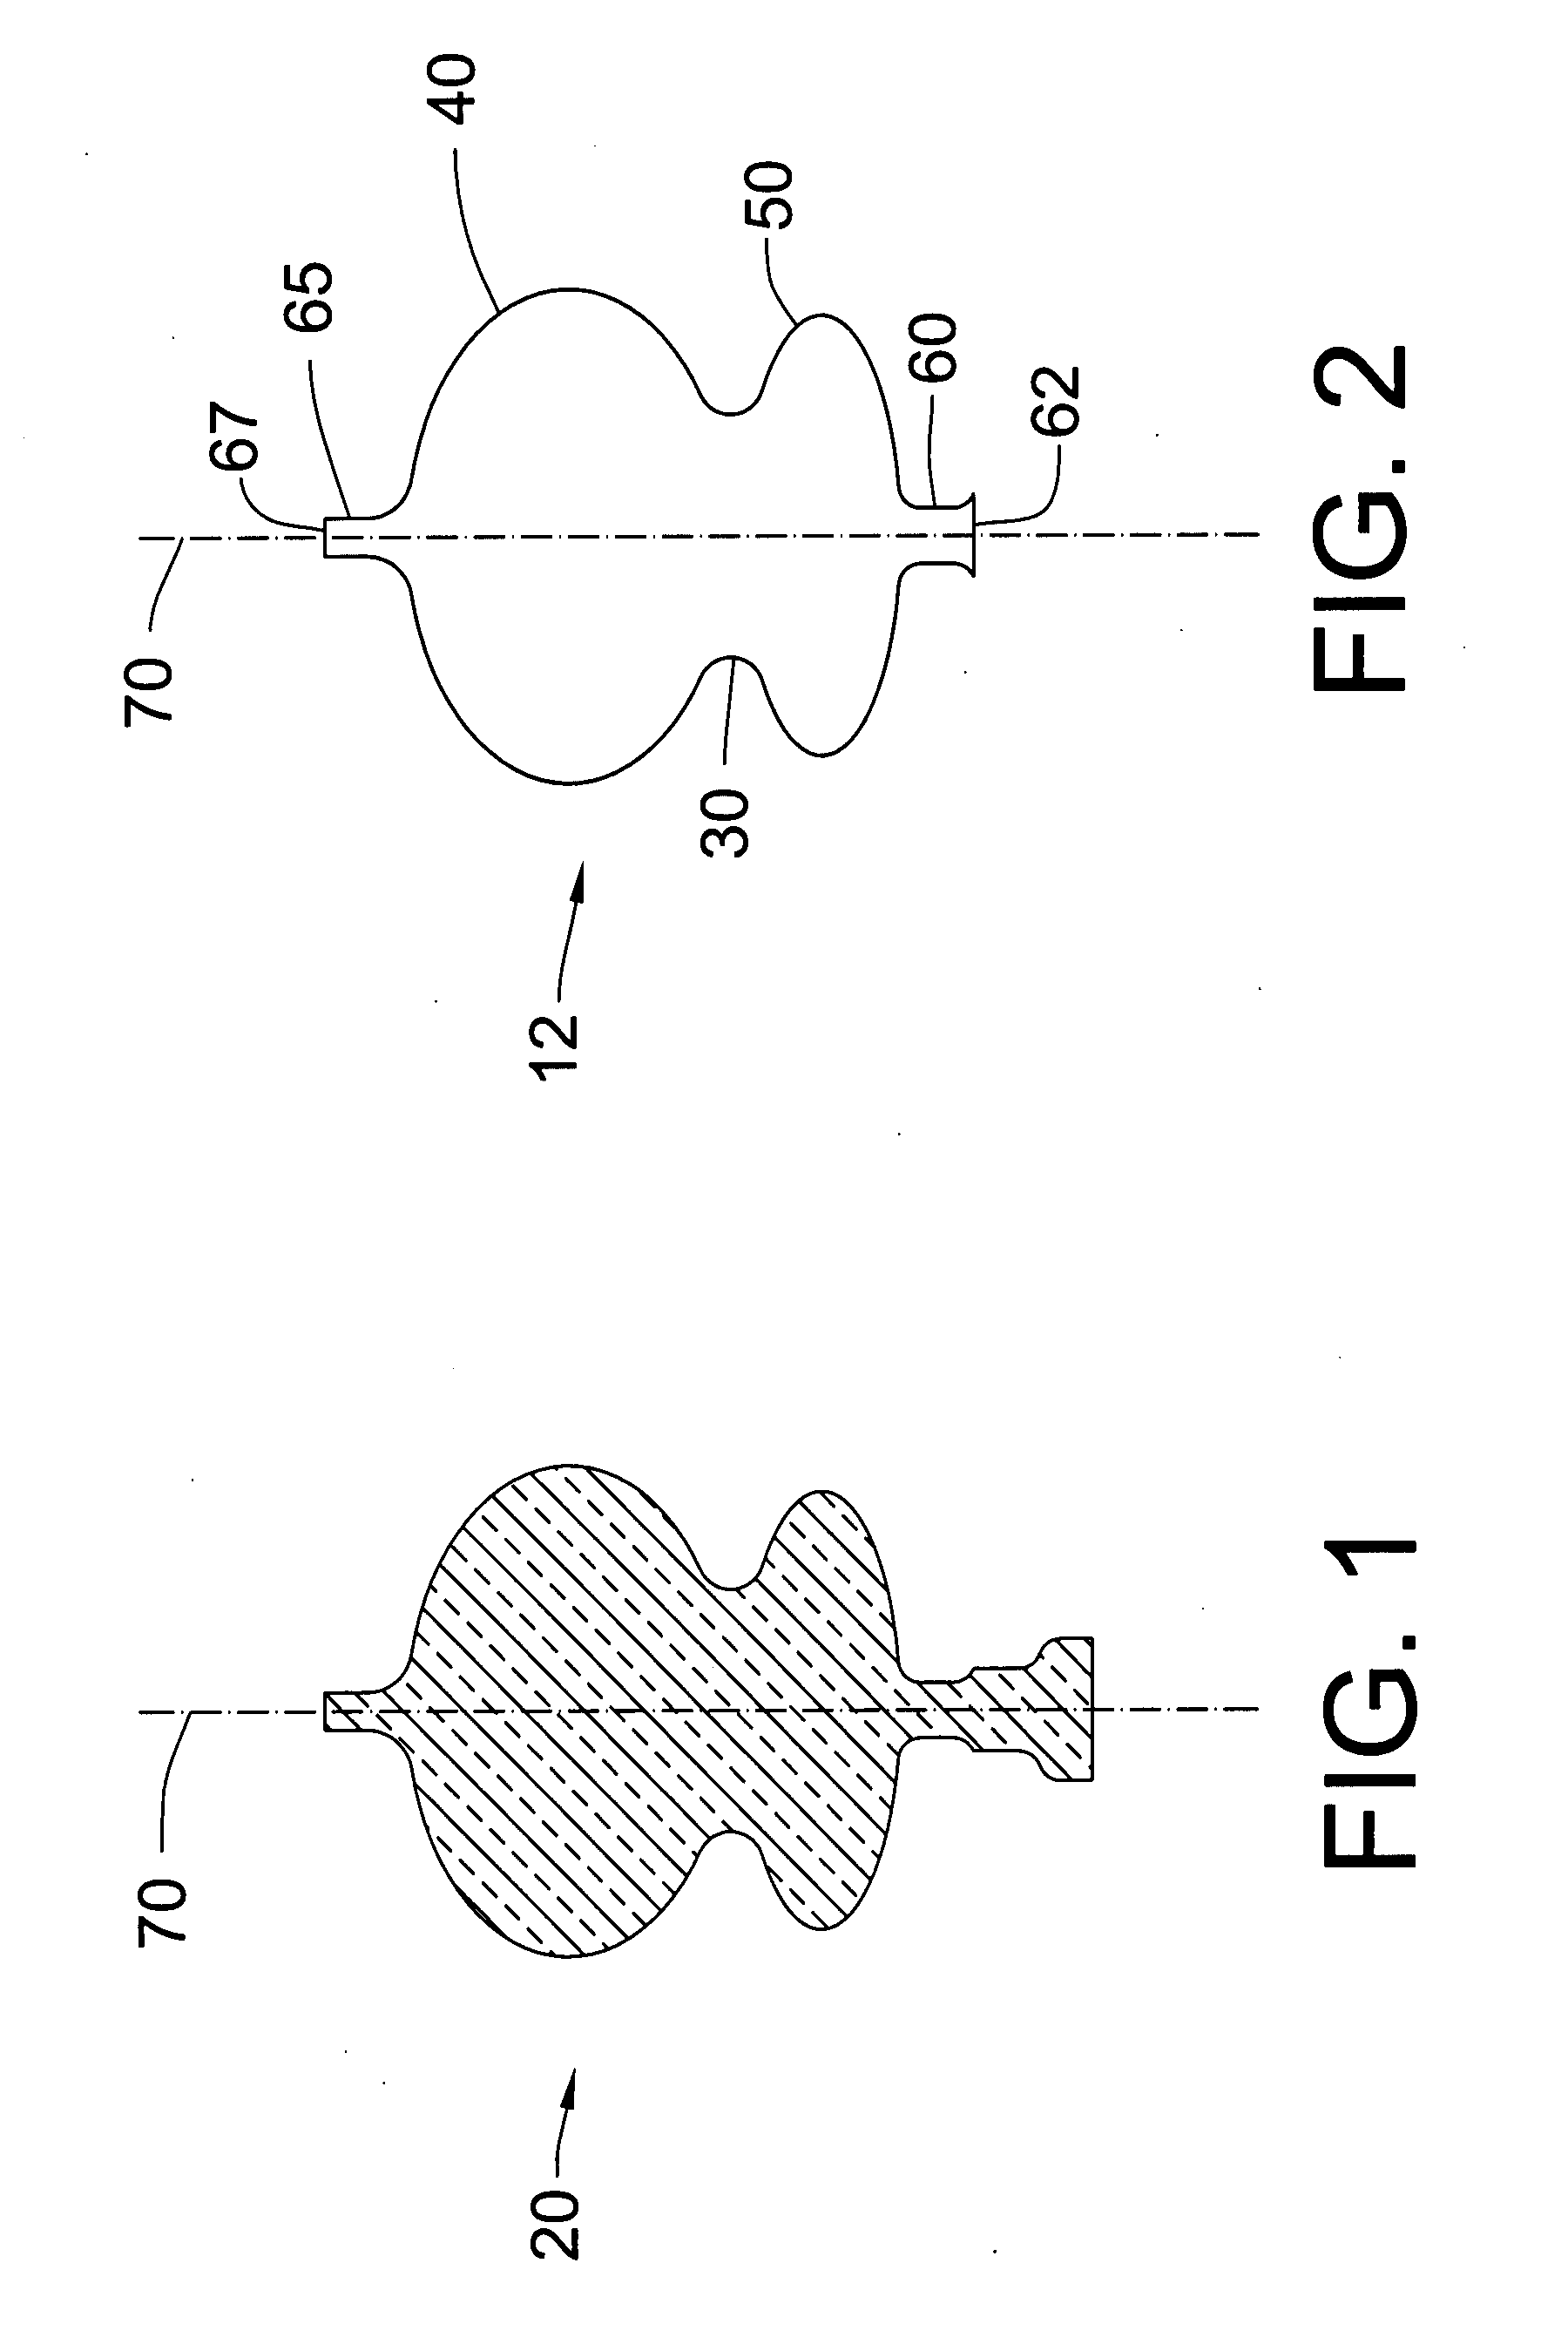 Over-the-wire exclusion device and system for delivery